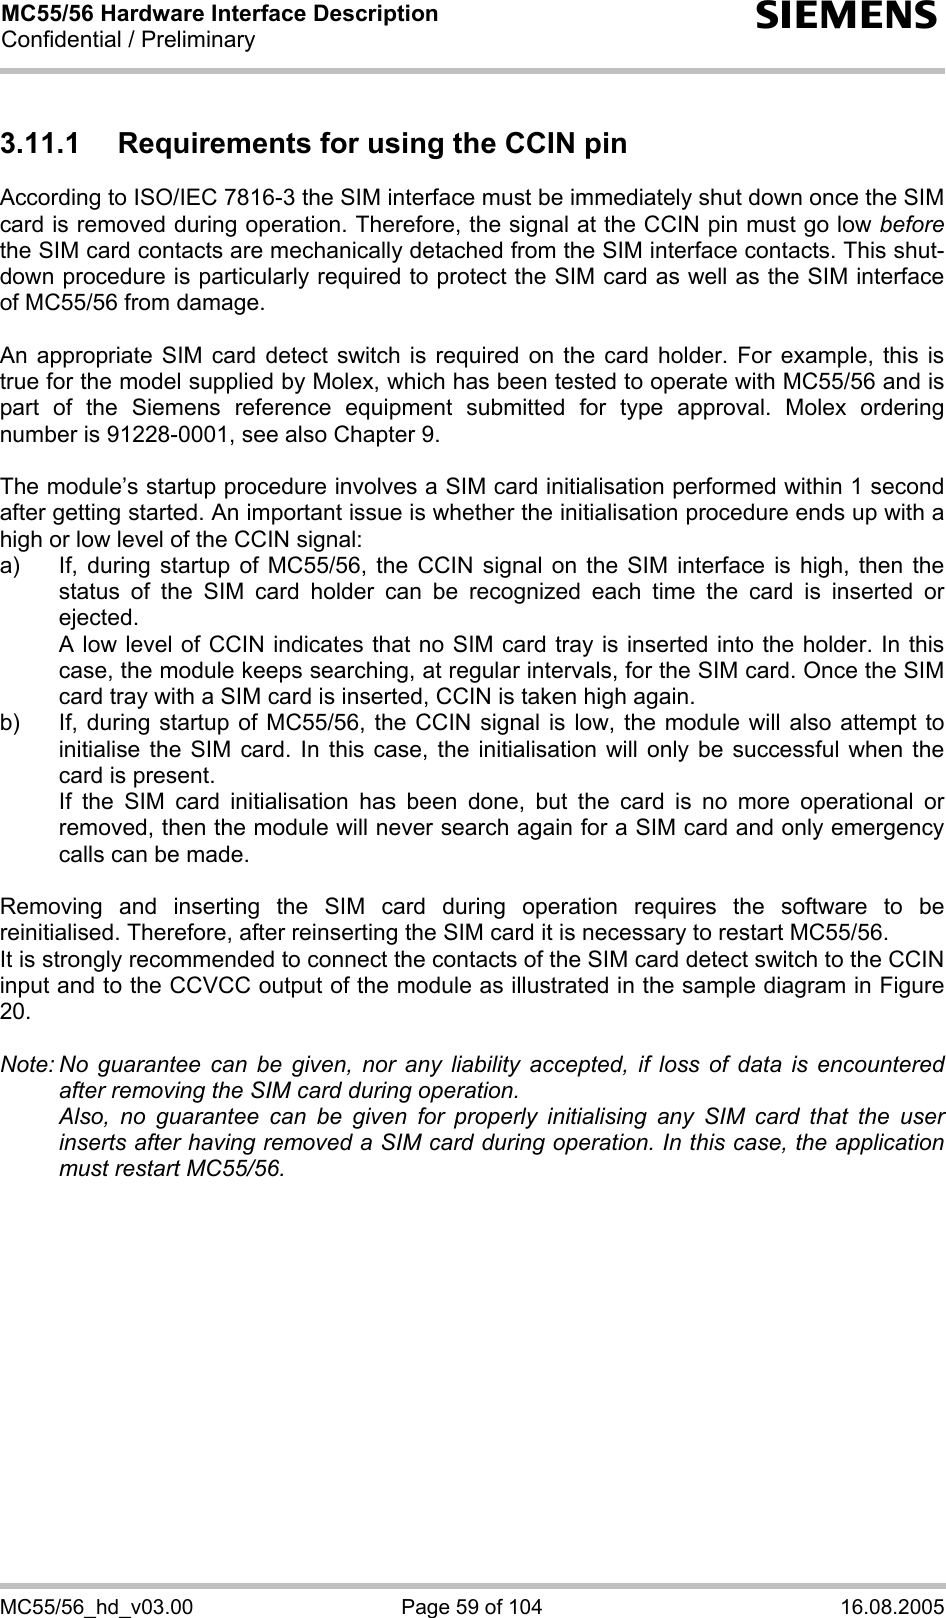 MC55/56 Hardware Interface Description Confidential / Preliminary s MC55/56_hd_v03.00  Page 59 of 104  16.08.2005 3.11.1  Requirements for using the CCIN pin According to ISO/IEC 7816-3 the SIM interface must be immediately shut down once the SIM card is removed during operation. Therefore, the signal at the CCIN pin must go low before the SIM card contacts are mechanically detached from the SIM interface contacts. This shut-down procedure is particularly required to protect the SIM card as well as the SIM interface of MC55/56 from damage.  An appropriate SIM card detect switch is required on the card holder. For example, this is true for the model supplied by Molex, which has been tested to operate with MC55/56 and is part of the Siemens reference equipment submitted for type approval. Molex ordering number is 91228-0001, see also Chapter 9.  The module’s startup procedure involves a SIM card initialisation performed within 1 second after getting started. An important issue is whether the initialisation procedure ends up with a high or low level of the CCIN signal: a)  If, during startup of MC55/56, the CCIN signal on the SIM interface is high, then the status of the SIM card holder can be recognized each time the card is inserted or ejected.    A low level of CCIN indicates that no SIM card tray is inserted into the holder. In this case, the module keeps searching, at regular intervals, for the SIM card. Once the SIM card tray with a SIM card is inserted, CCIN is taken high again. b)  If, during startup of MC55/56, the CCIN signal is low, the module will also attempt to initialise the SIM card. In this case, the initialisation will only be successful when the card is present.    If the SIM card initialisation has been done, but the card is no more operational or removed, then the module will never search again for a SIM card and only emergency calls can be made.  Removing and inserting the SIM card during operation requires the software to be reinitialised. Therefore, after reinserting the SIM card it is necessary to restart MC55/56.  It is strongly recommended to connect the contacts of the SIM card detect switch to the CCIN input and to the CCVCC output of the module as illustrated in the sample diagram in Figure 20.  Note: No guarantee can be given, nor any liability accepted, if loss of data is encountered after removing the SIM card during operation.    Also, no guarantee can be given for properly initialising any SIM card that the user inserts after having removed a SIM card during operation. In this case, the application must restart MC55/56.   